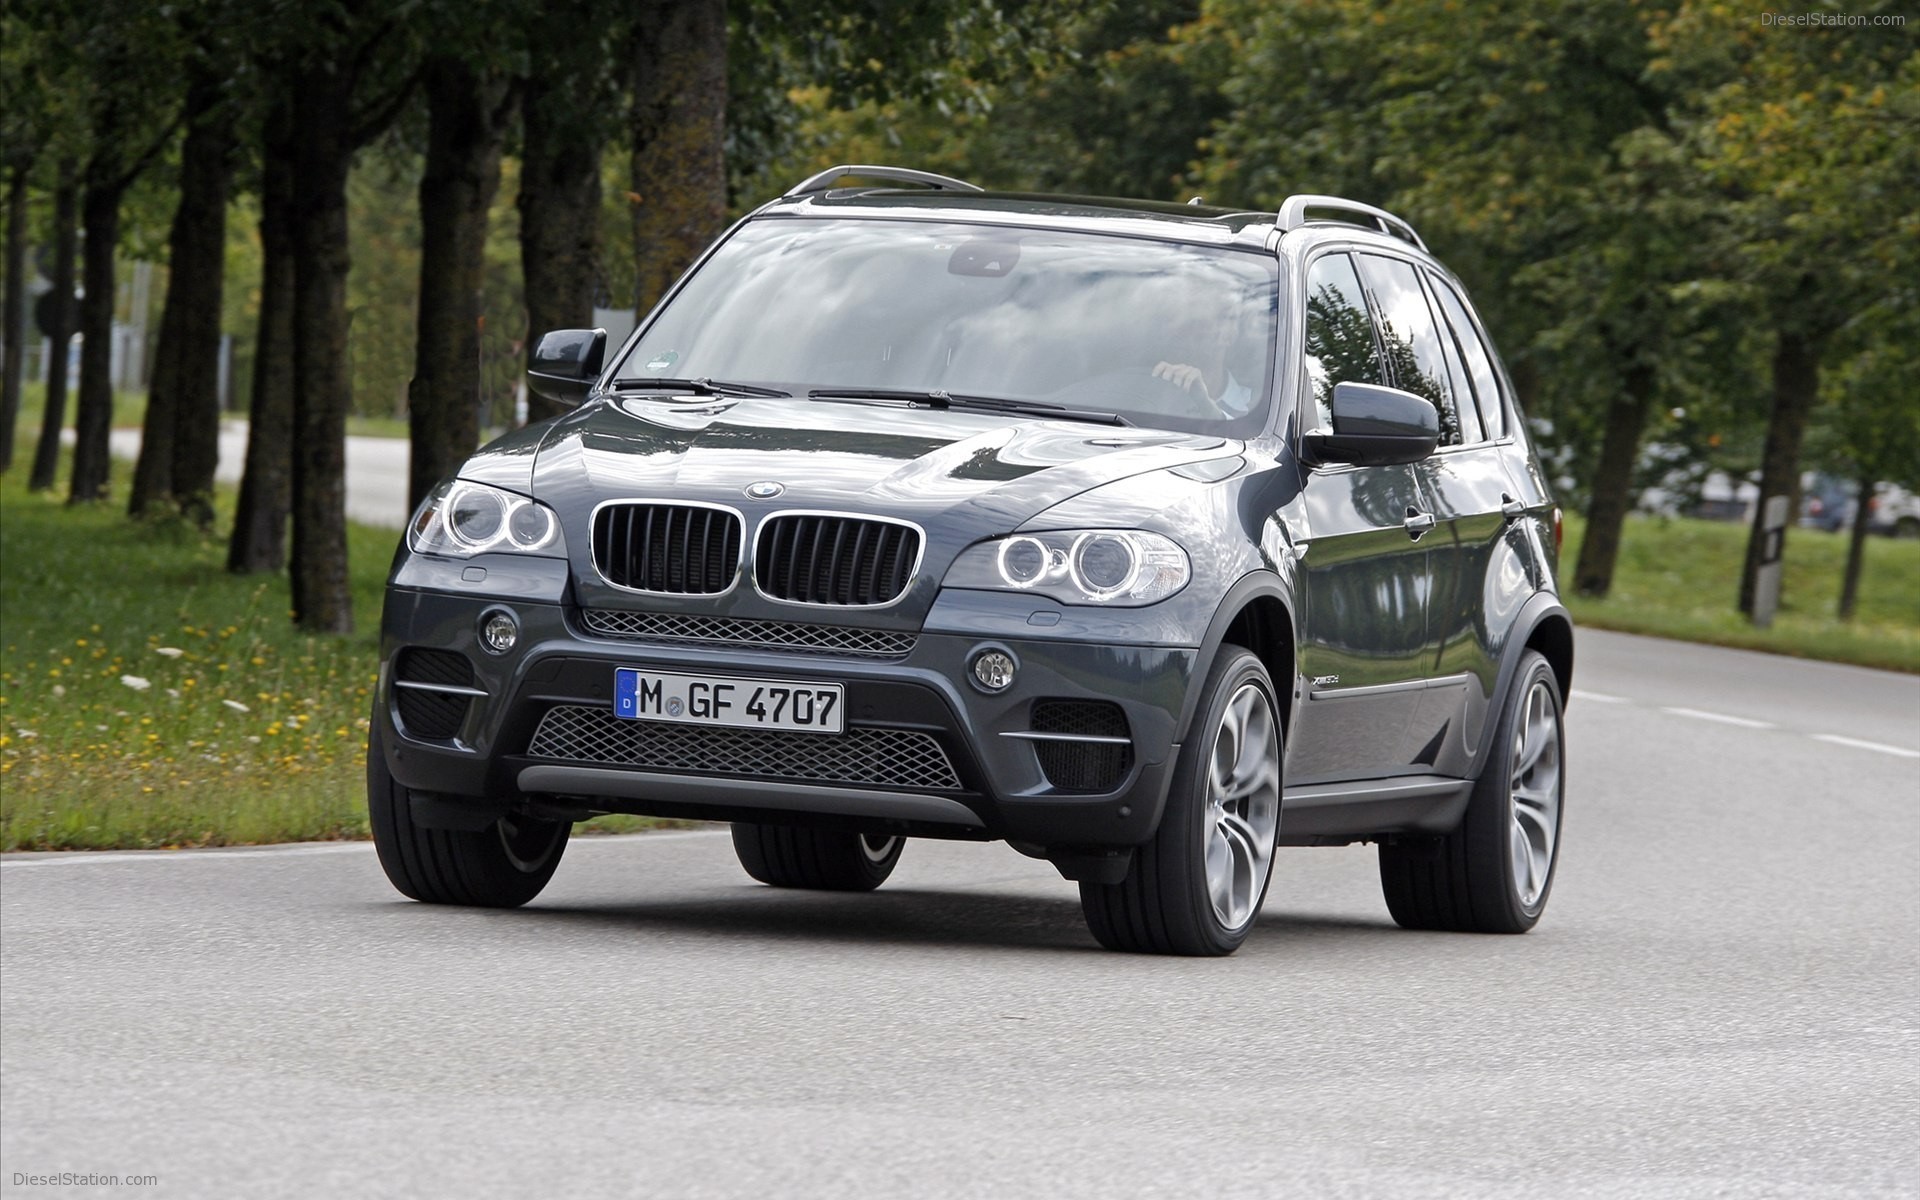 1920x1200 Bmw X5 2012 Widescreen Exotic Car Wallpaper 03 Of 40 Diesel Station Hd